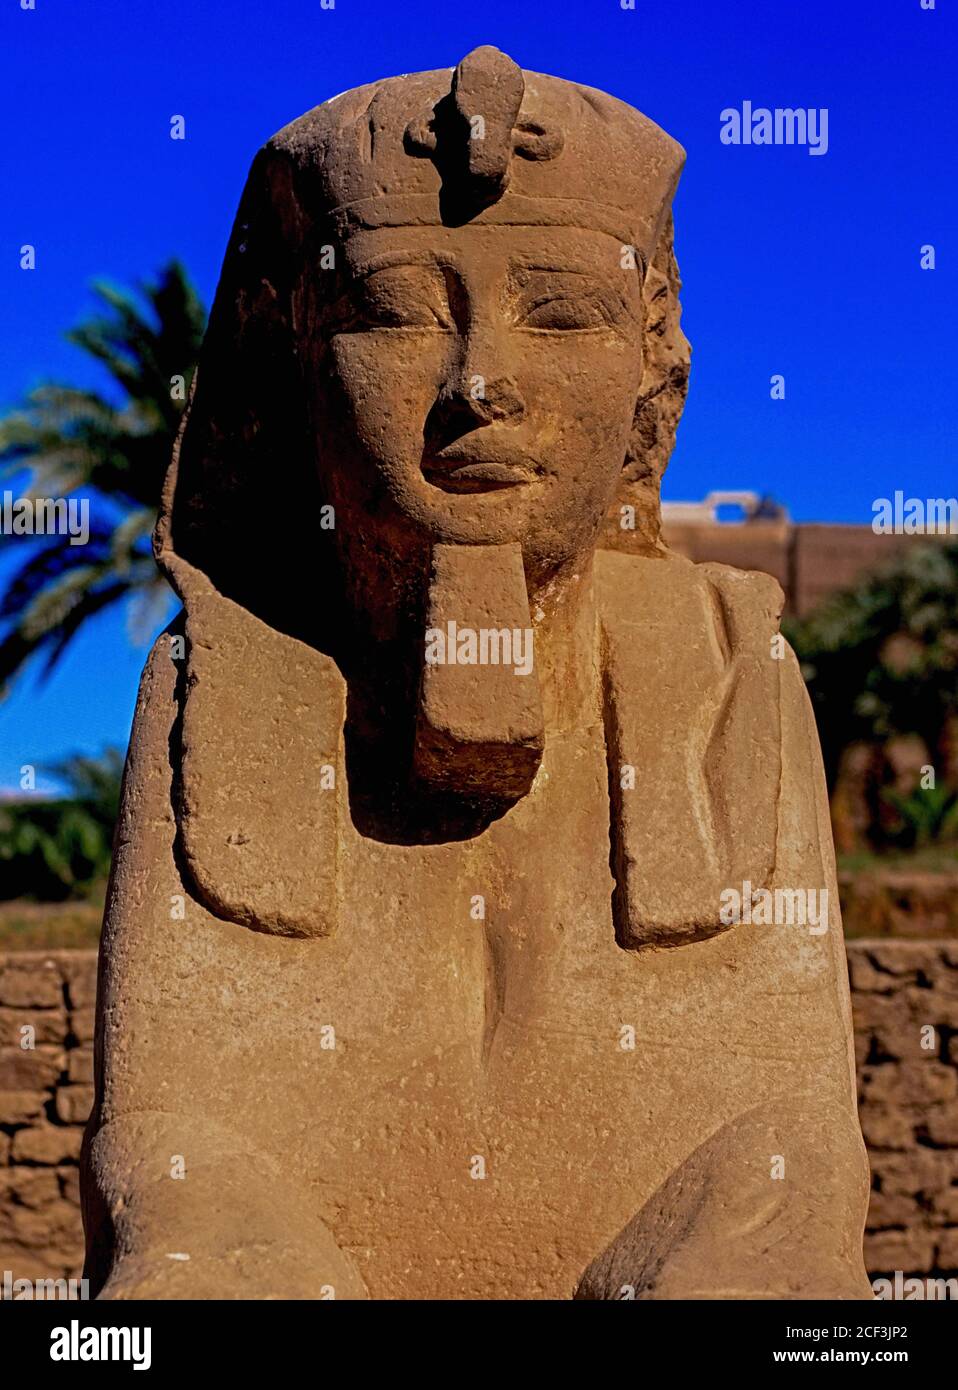 A 4th century BC sphinx sculpted with a human face in the 3 km (1.5 mi) Avenue of Sphinxes, part of the processional route connecting the Temple of Luxor with the Temple of Karnak at Luxor, Luxor Governate, Egypt.  The avenue was completed during the Late Period rule of the founder of the 30th Dynasty, Pharaoh Nectanebo I, who ruled the Egyptian empire from about 379 BC until his death in 362.  A total of around 1,350 stone sphinxes used to line the Avenue, but many were removed and reused during the Roman and medieval periods. Stock Photo